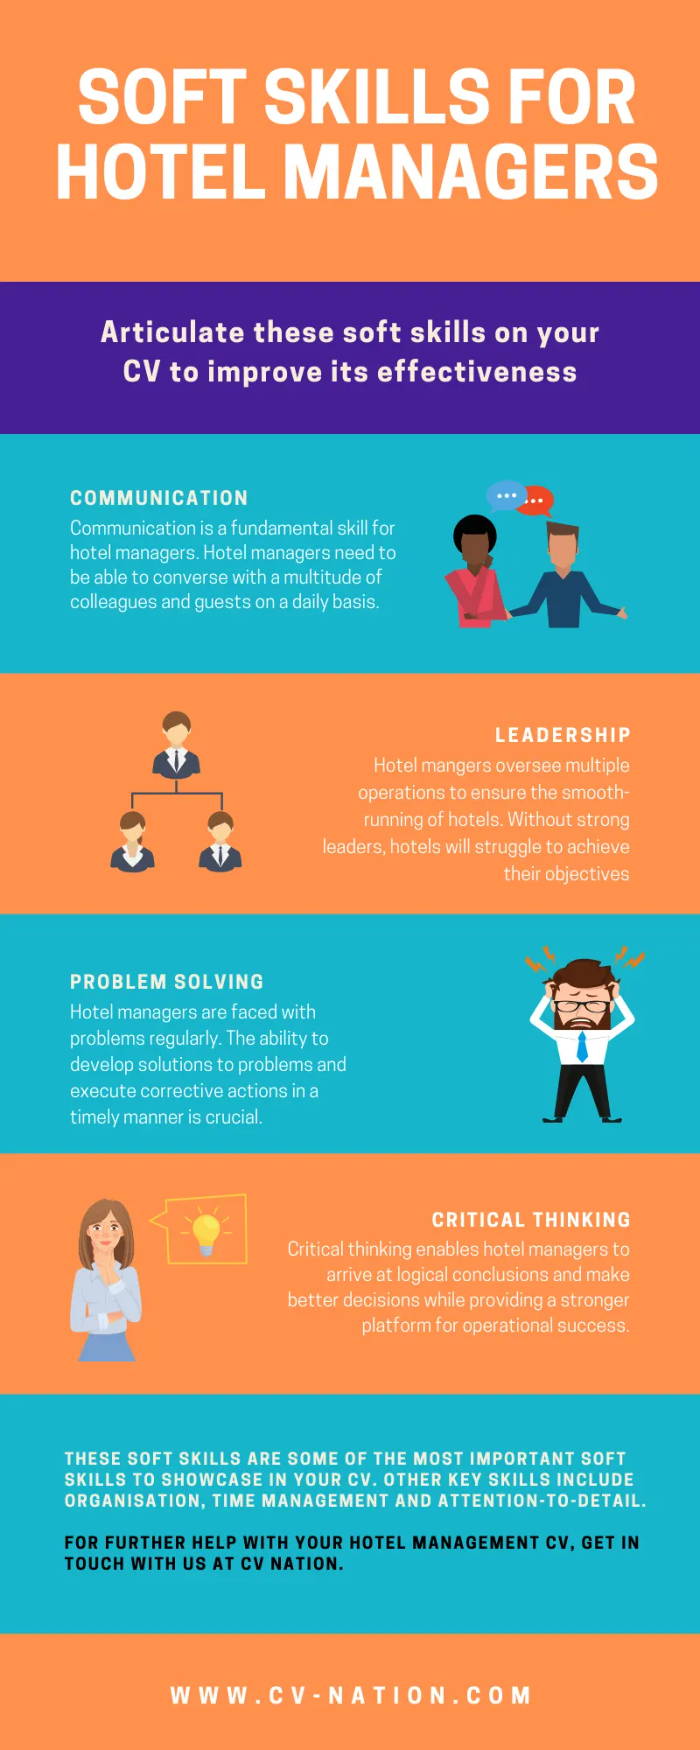 Soft Skills for Hotel Managers